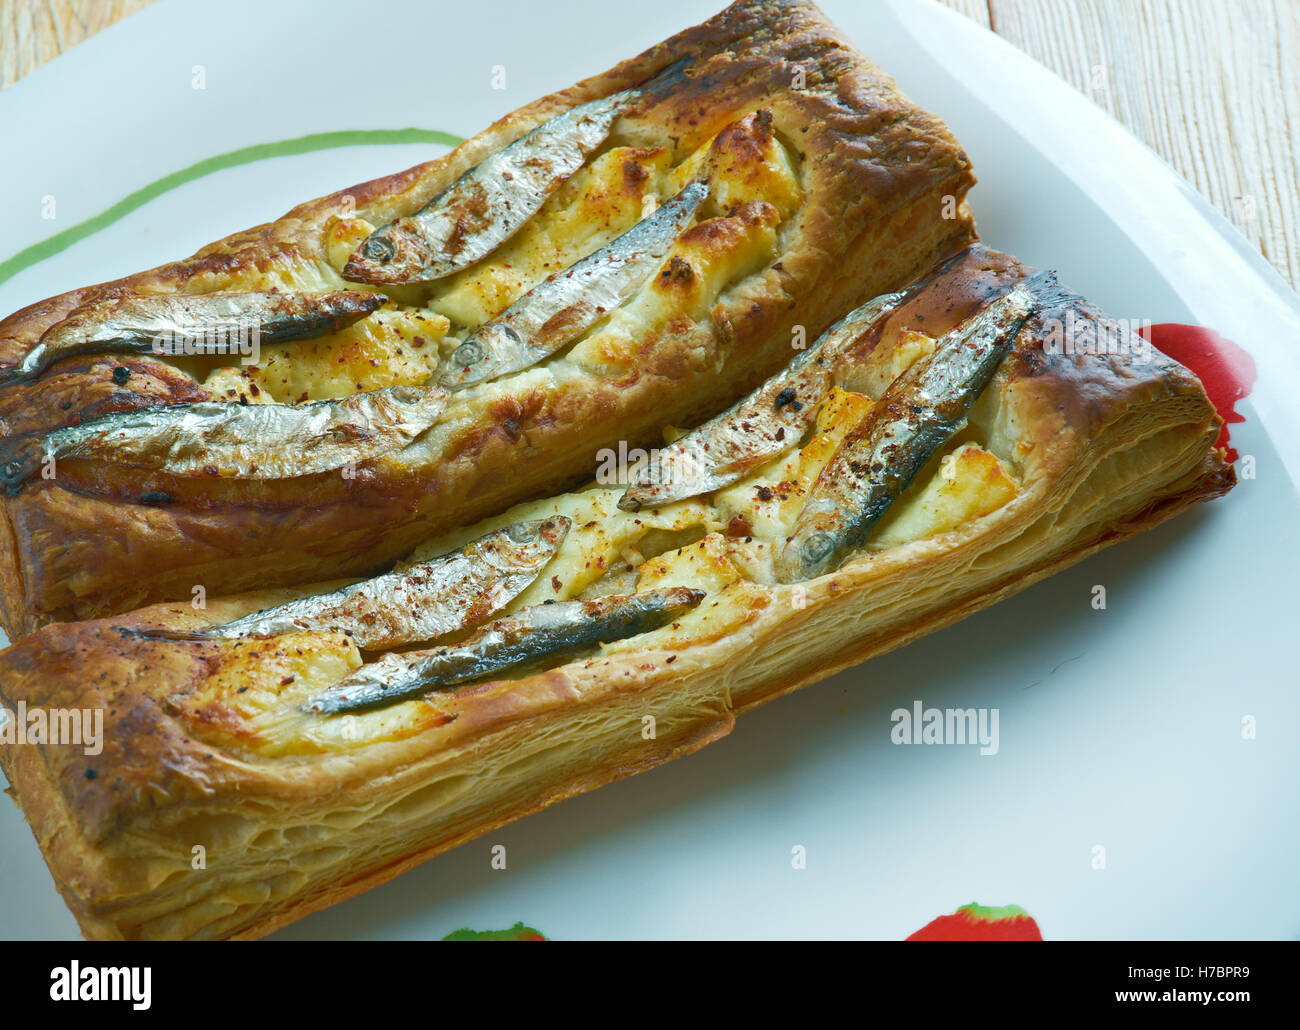 Pastry tart with anchovies. French cuisine Stock Photo